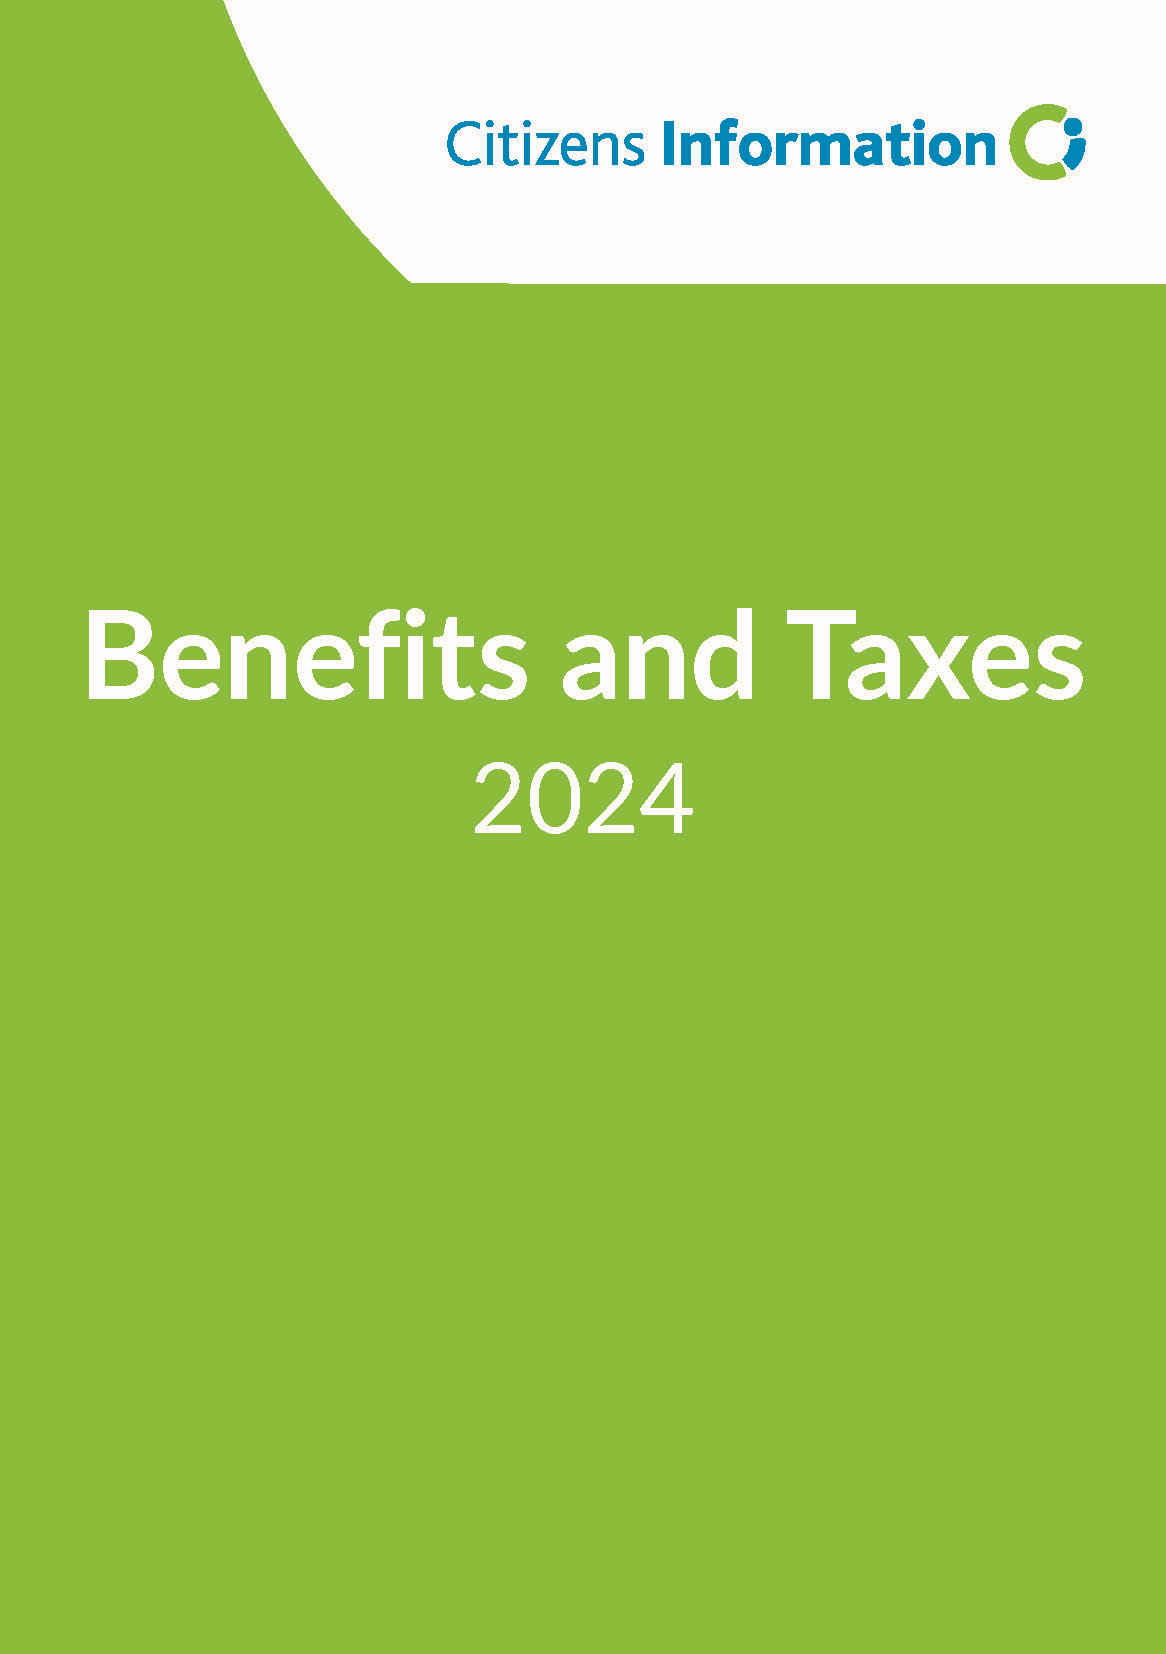 Cover of Benefits and Taxes 2024 leaflet